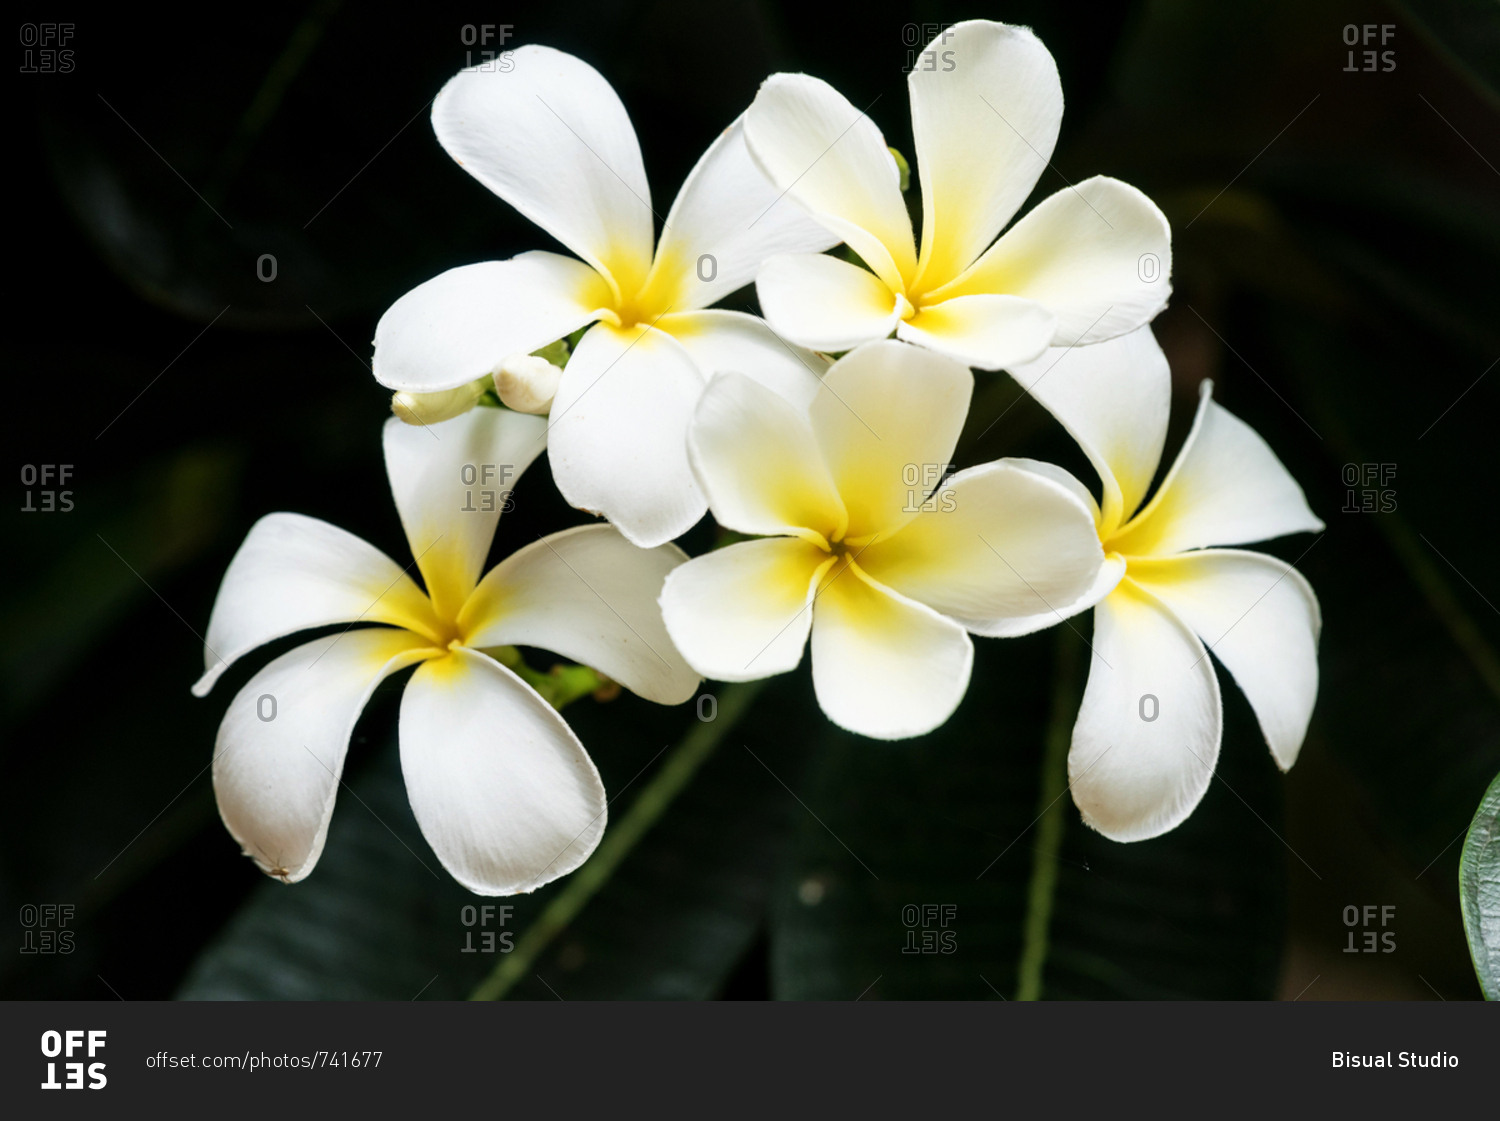 White and yellow plumeria flowers in a tree, Sukhothai, Thailand